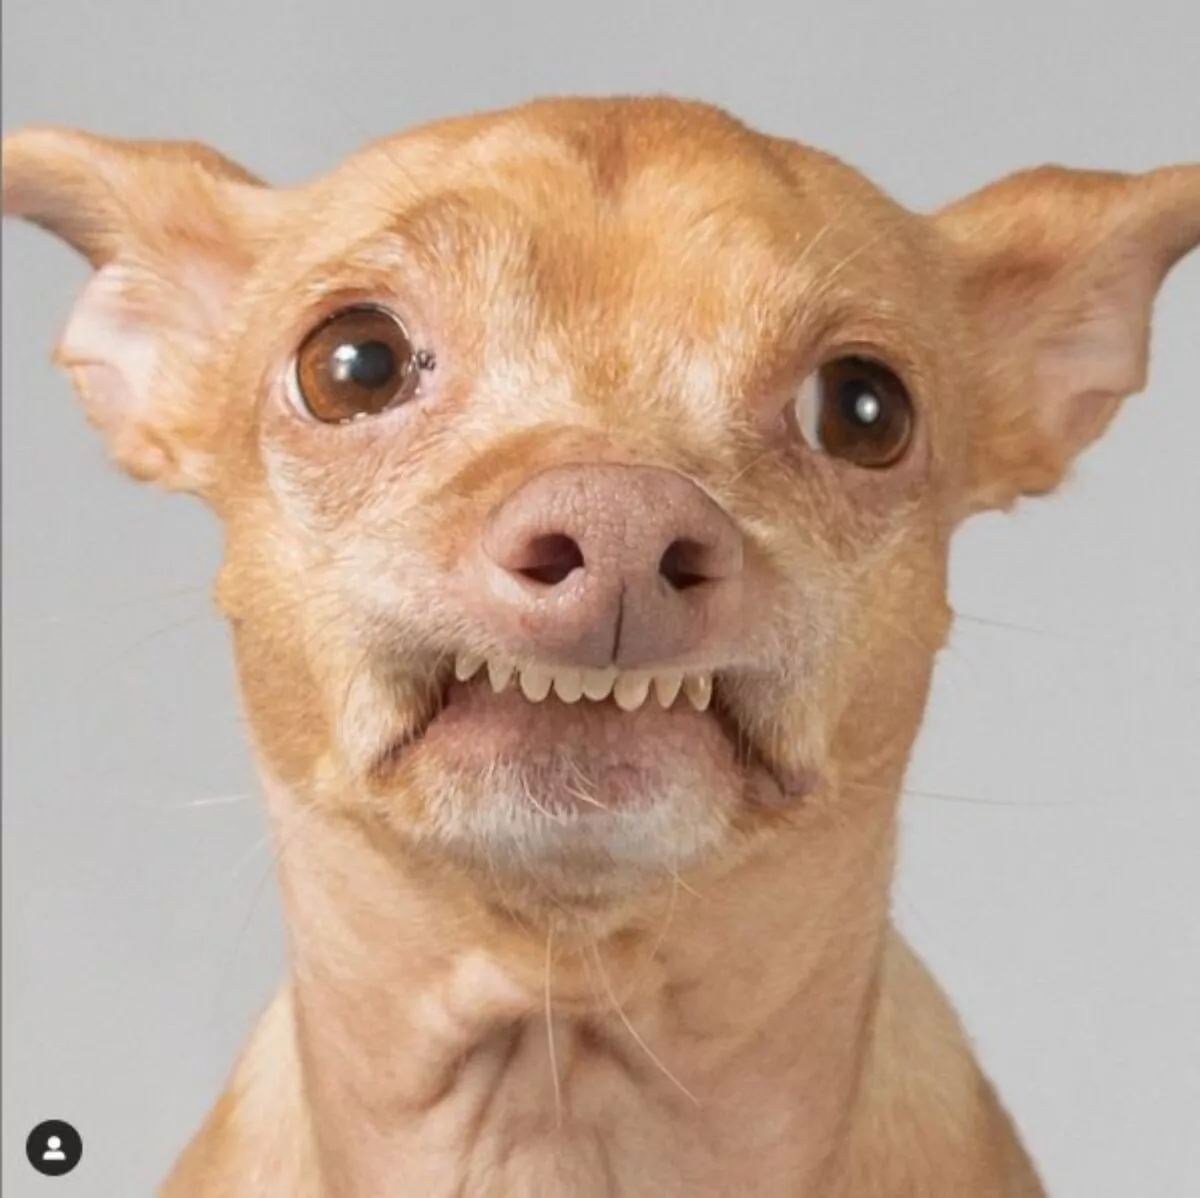 Dog showing an overbite